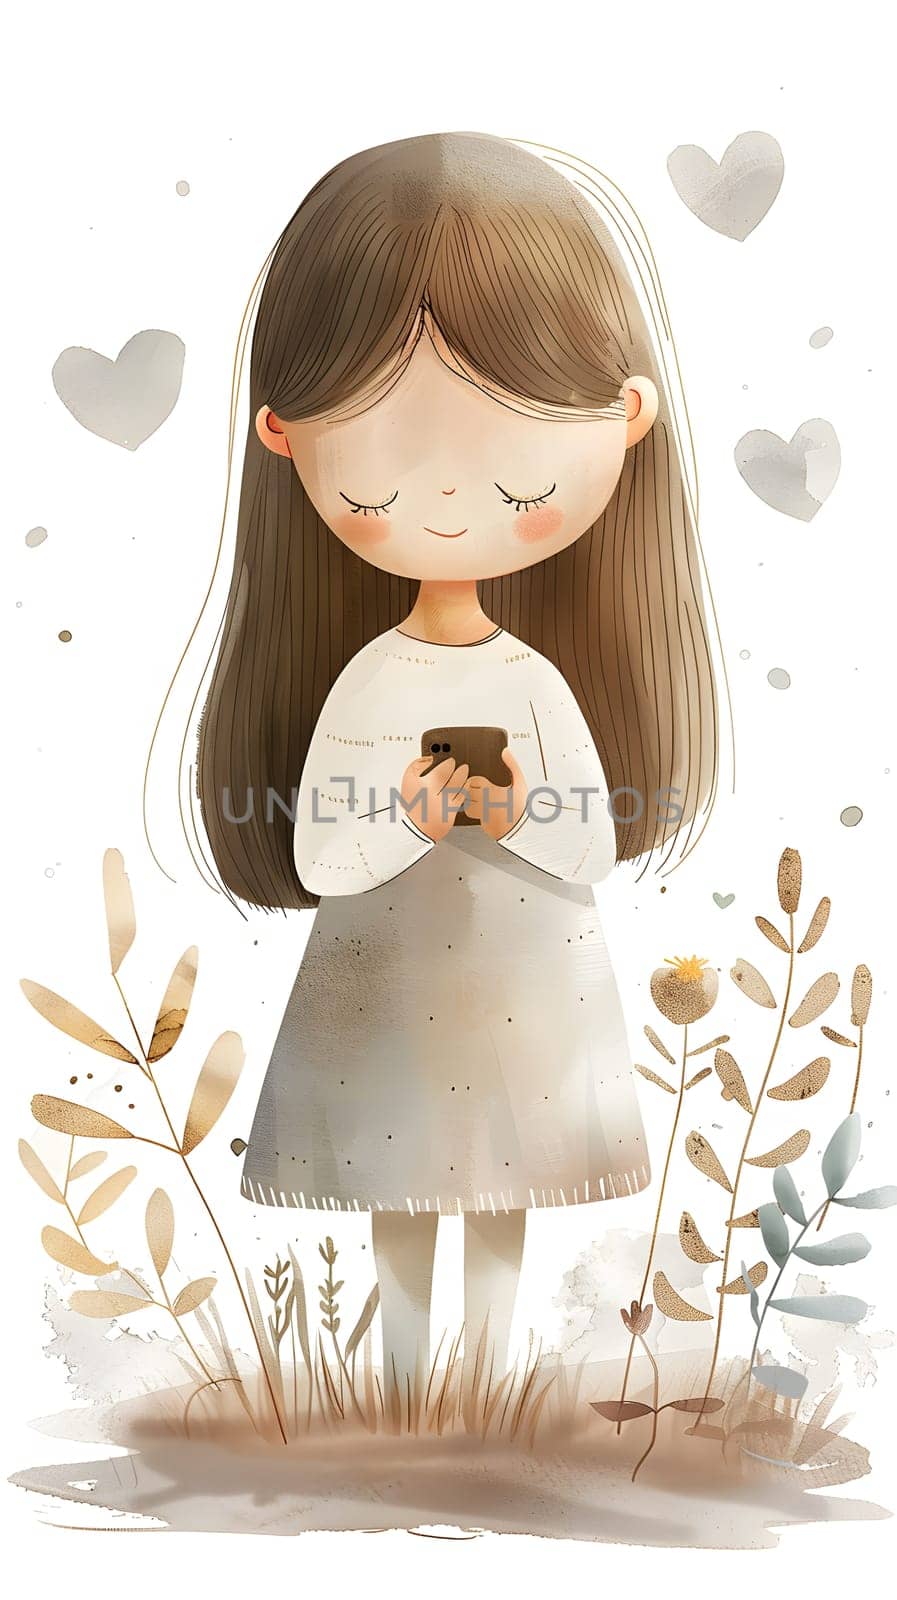 A little girl in a beautiful gown stands in the grass with a book in hand by Nadtochiy